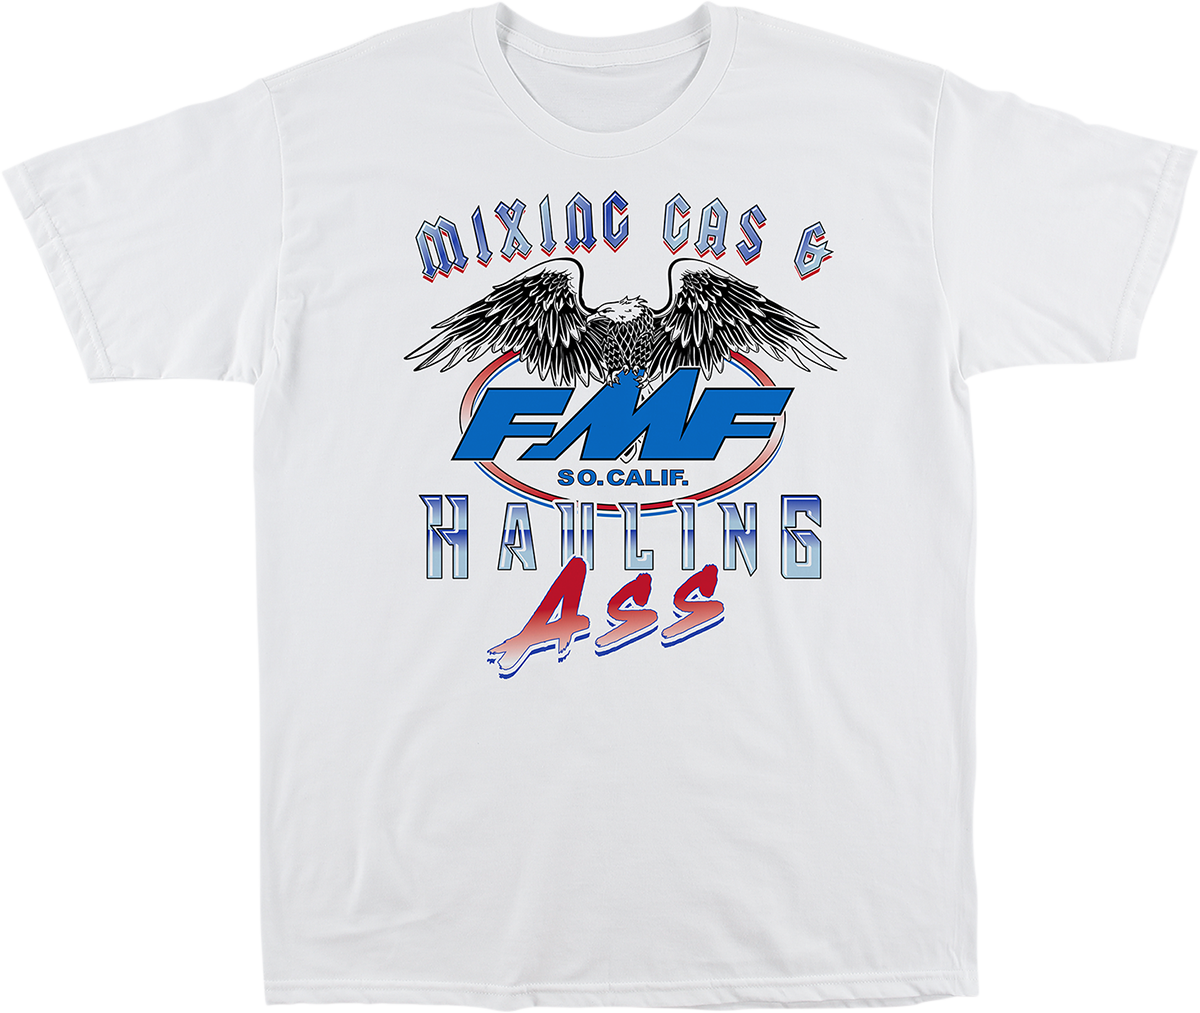 FMF Fighter T-Shirt - White - Small FA21118907WHSM 3030-21277